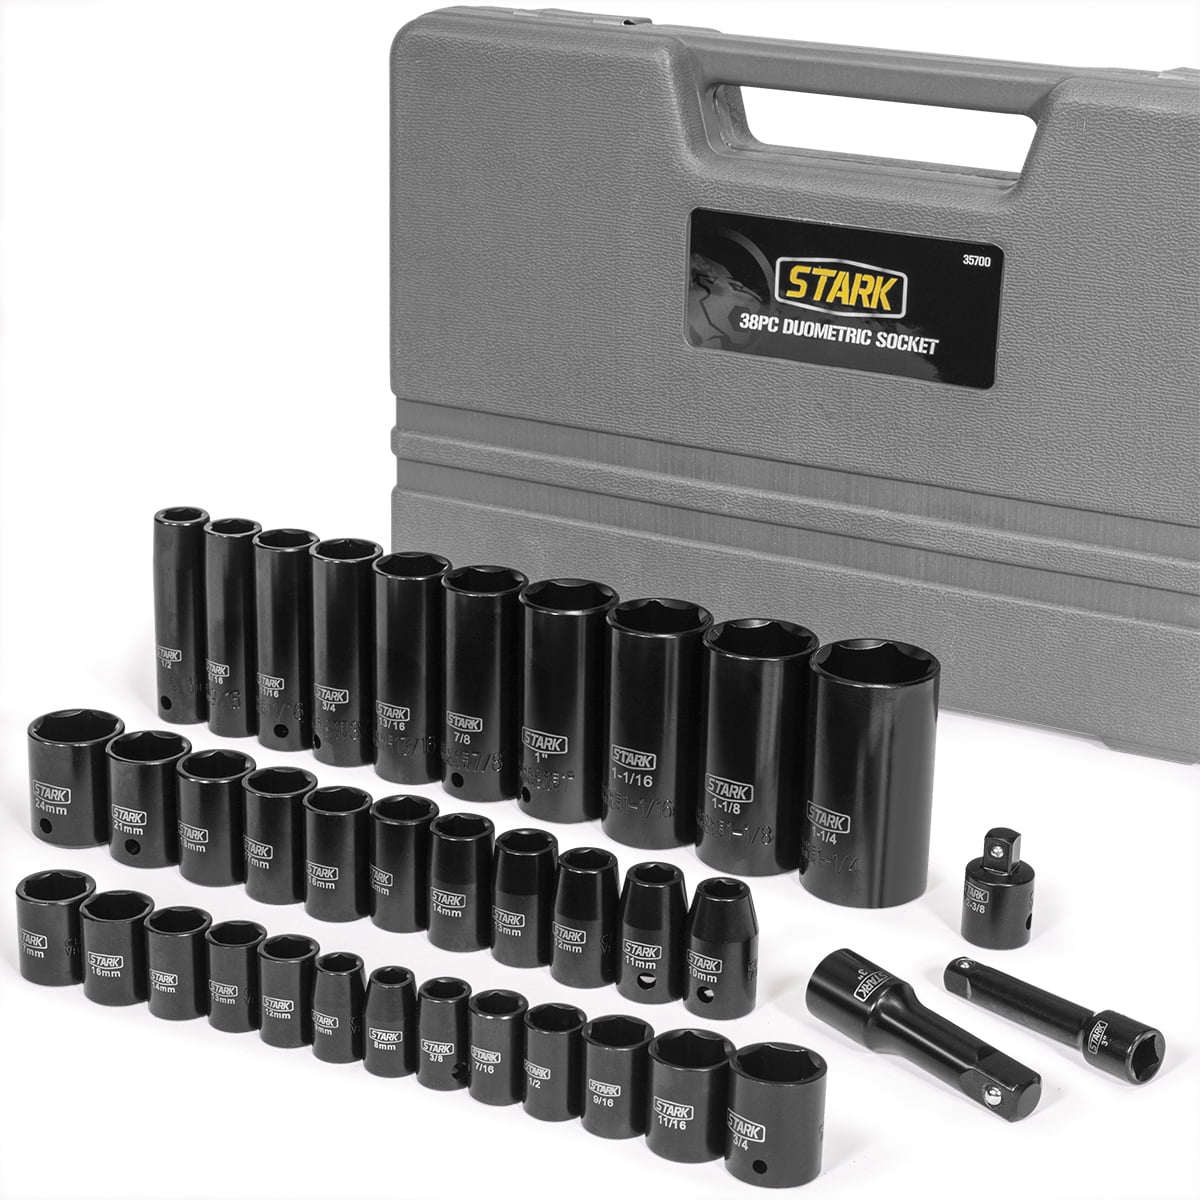 Inch SAE CASOMAN Complete 3/8" and 1/2” Drive Impact Socket Set /Metric 